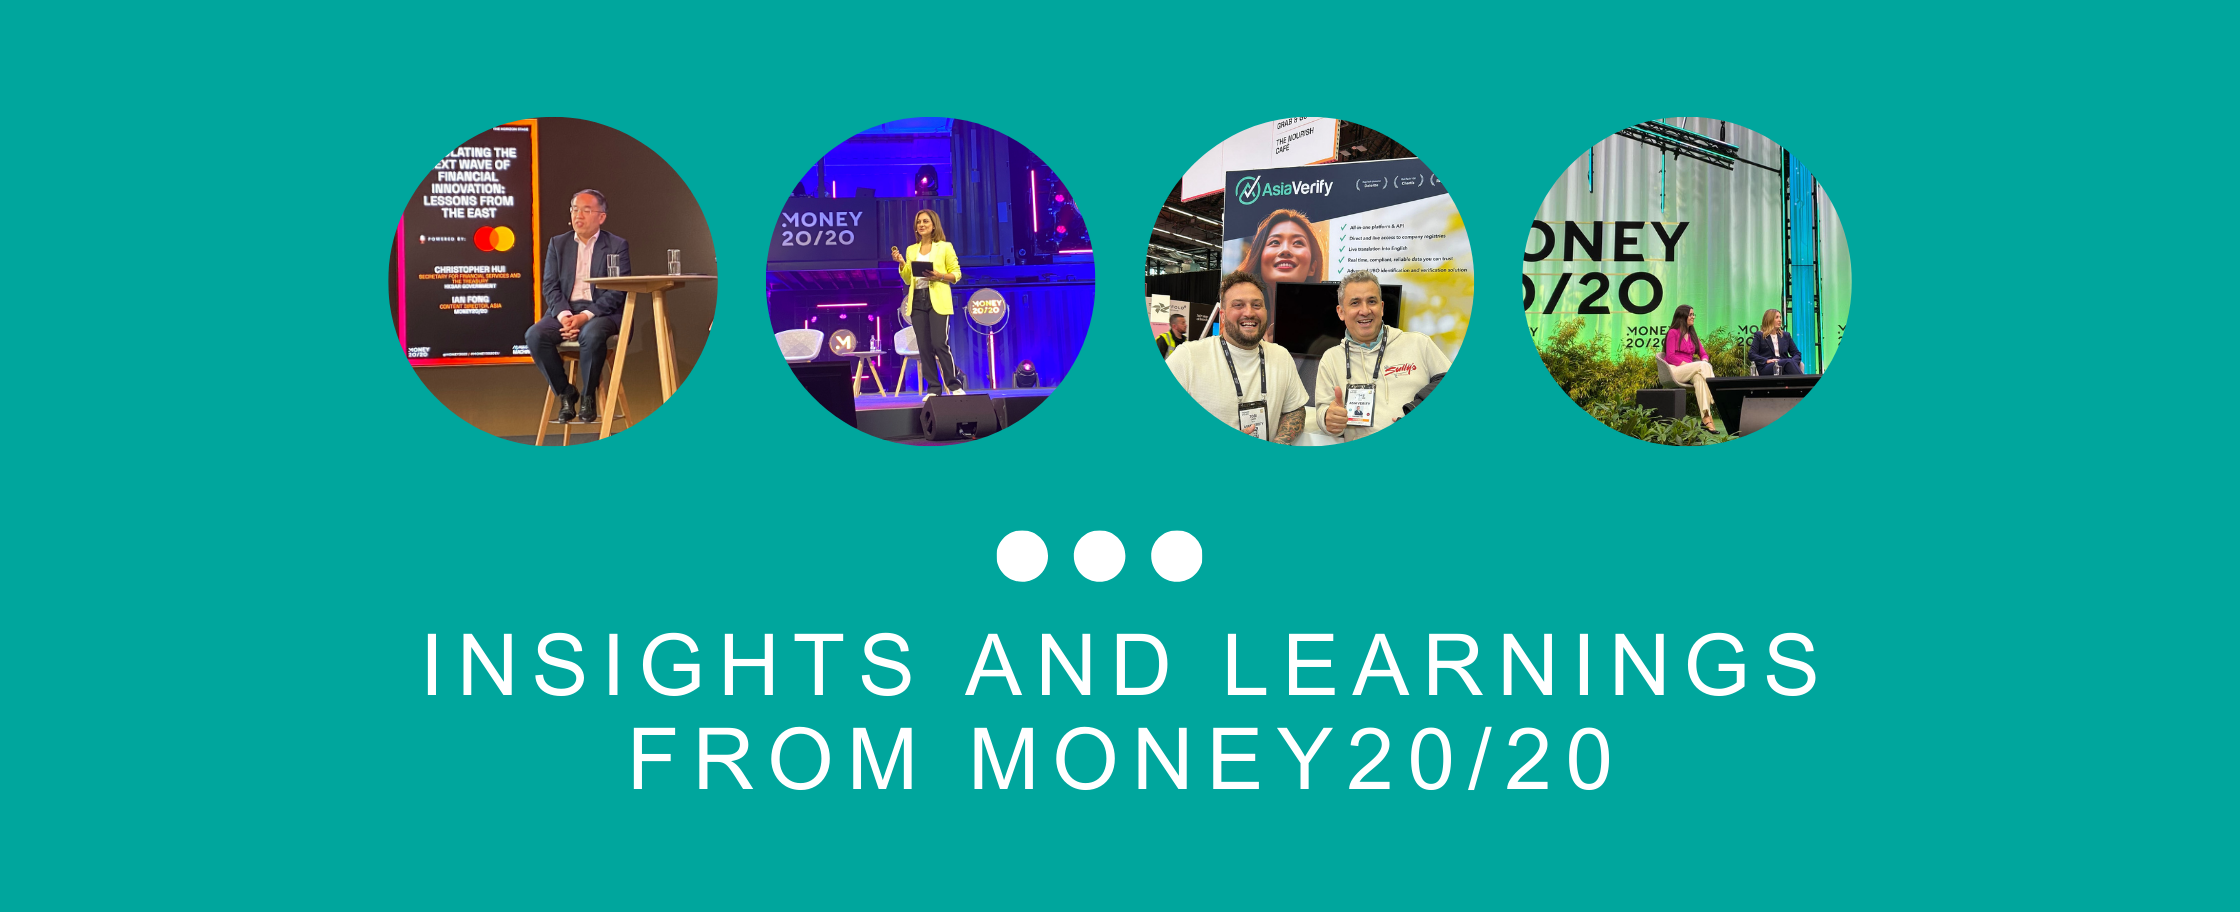 Insights And Learnings From Money2020